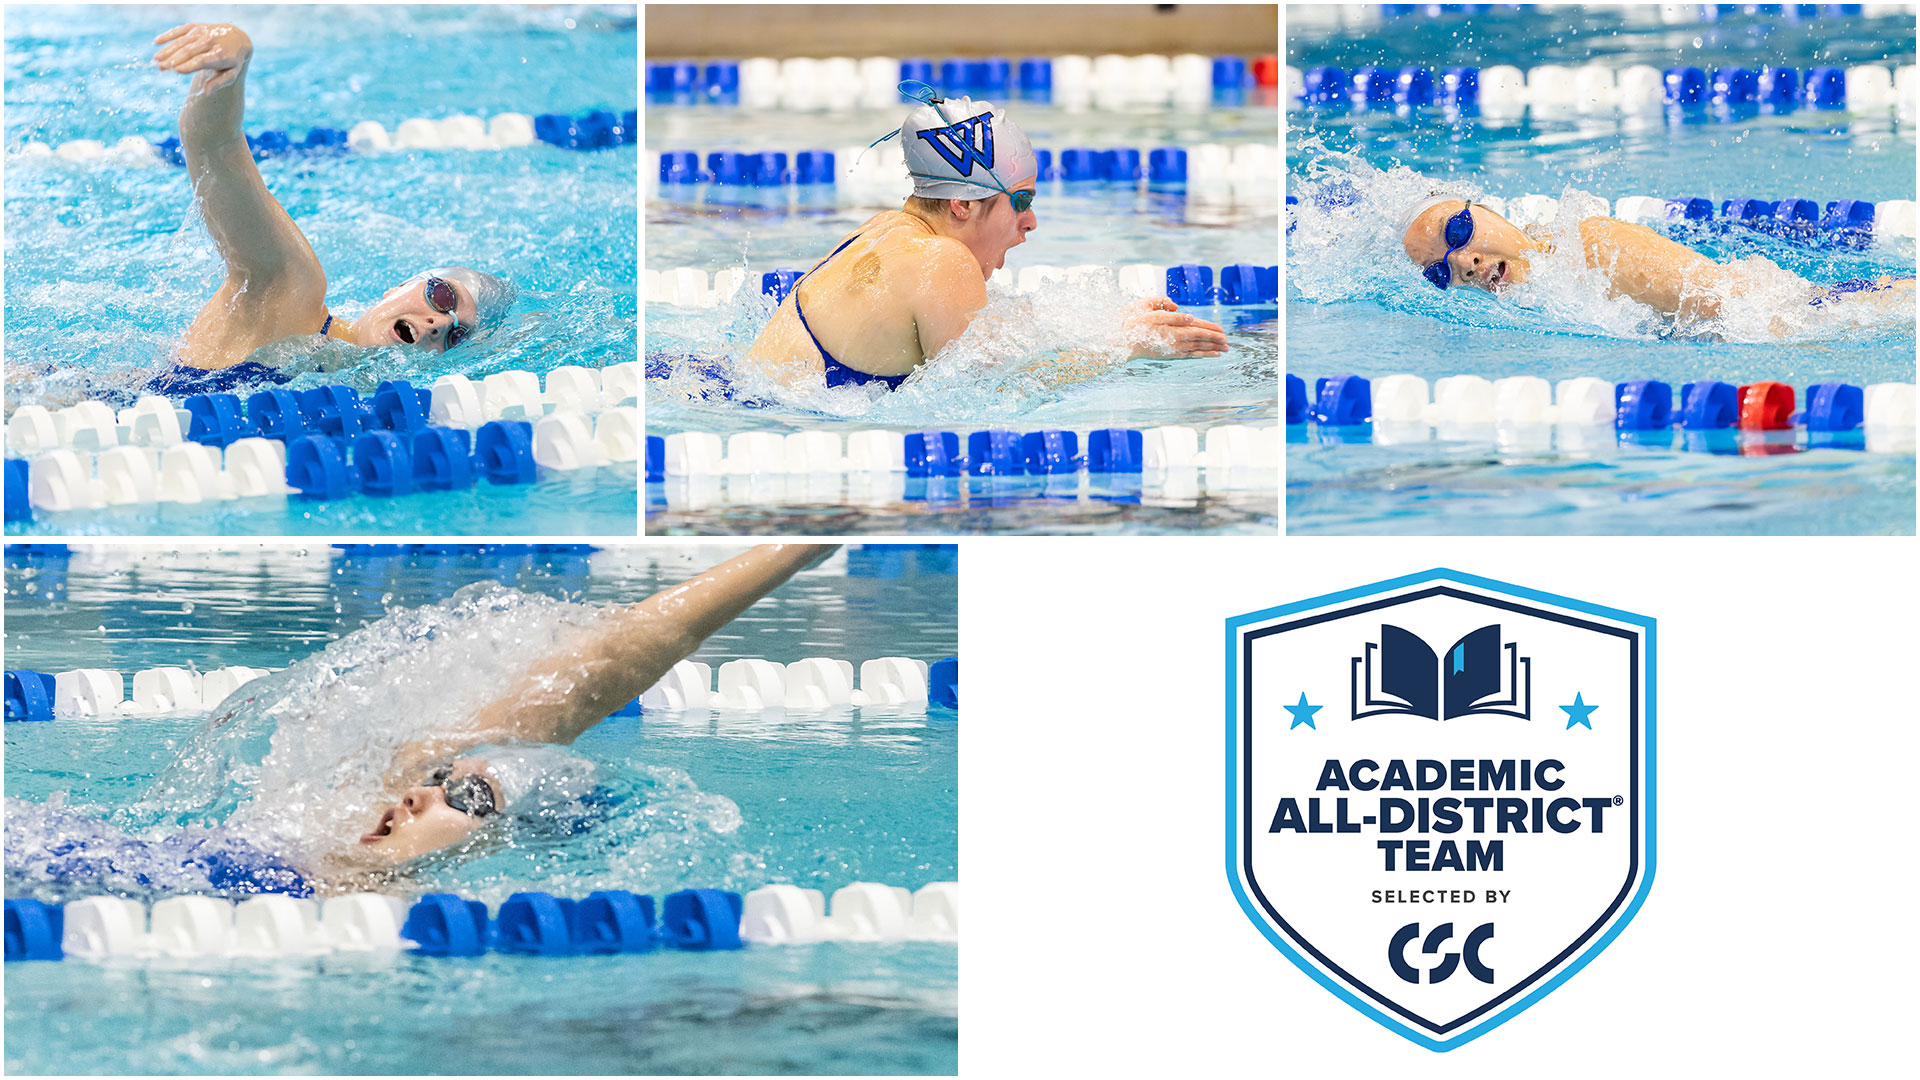 Four members of Wellesley swimming &amp; diving earned CSC Academic All-District honors (Frank Poulin)